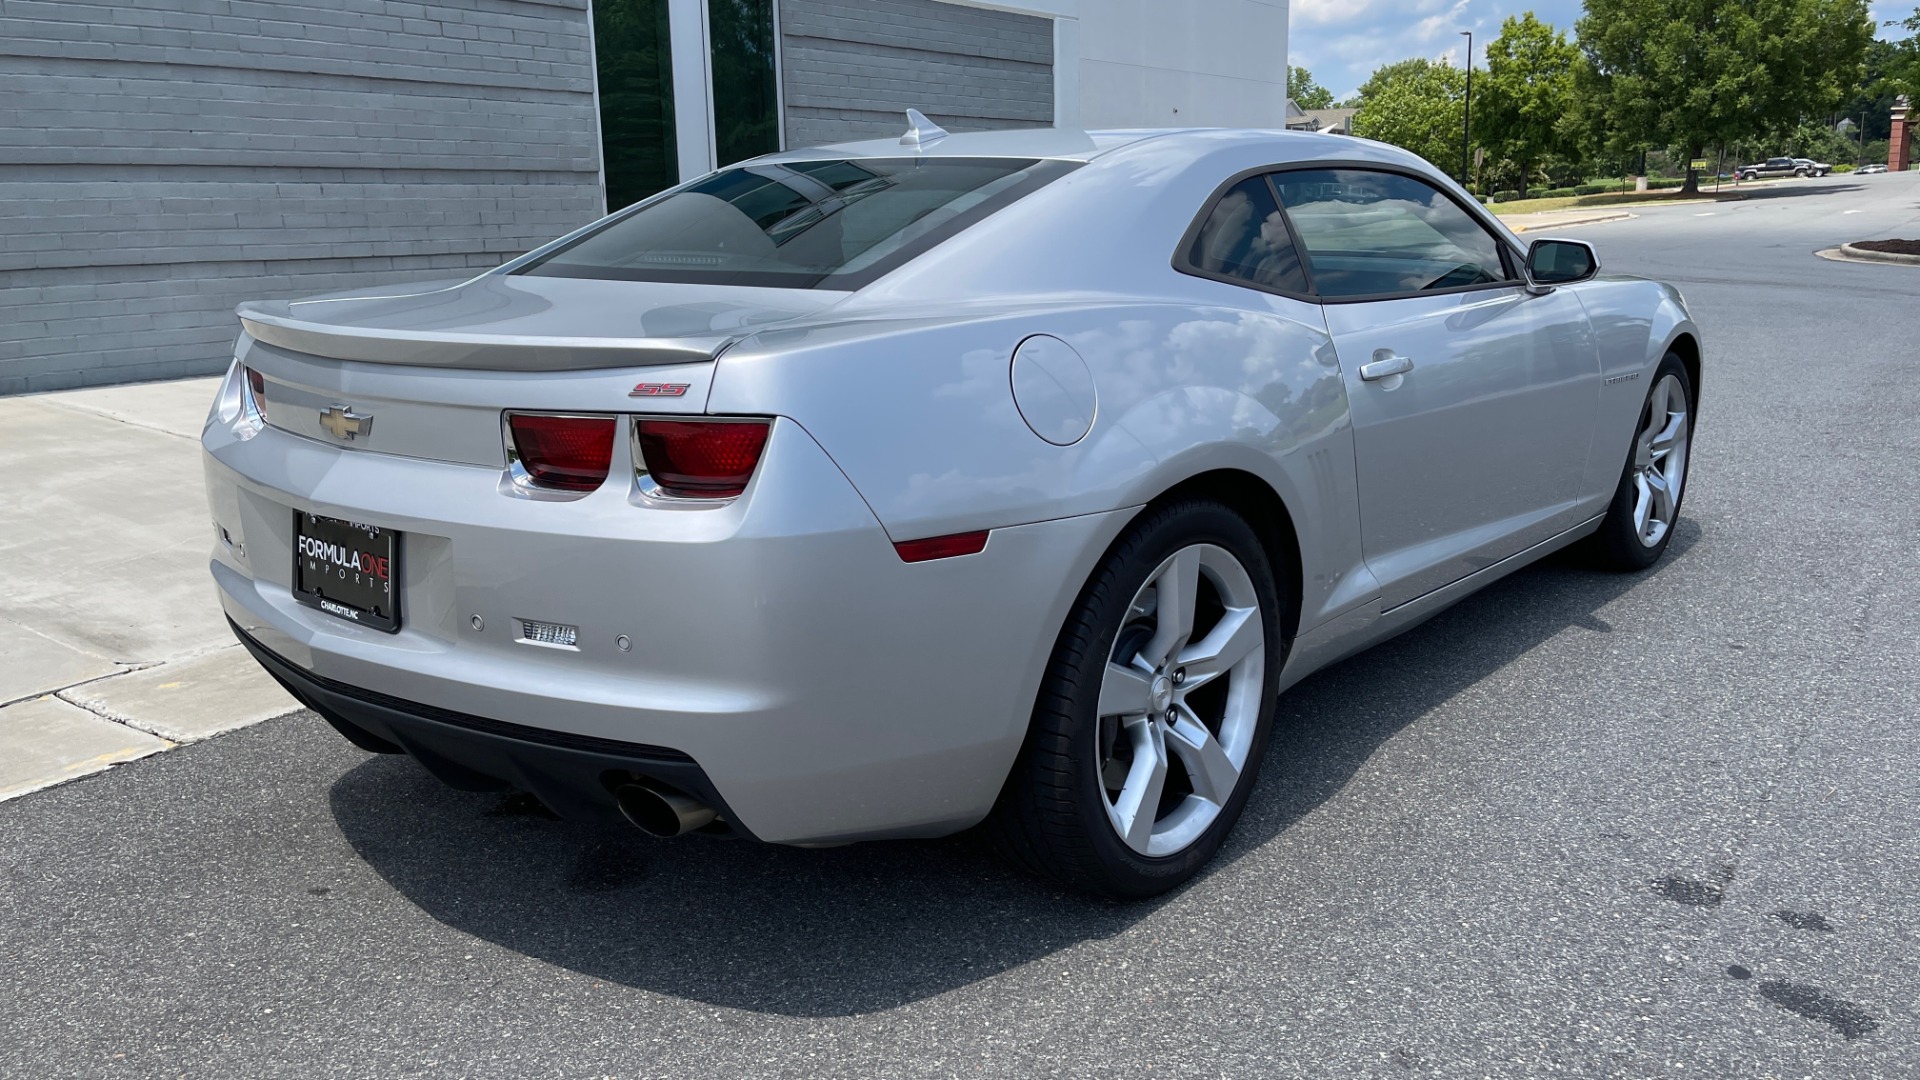 Used 2012 Chevrolet CAMARO SS COUPE / 6.2L V8 / 2SS / RS PKG / 6-SPD AUTO / SUNROOF / REMOTE START for sale Sold at Formula Imports in Charlotte NC 28227 2